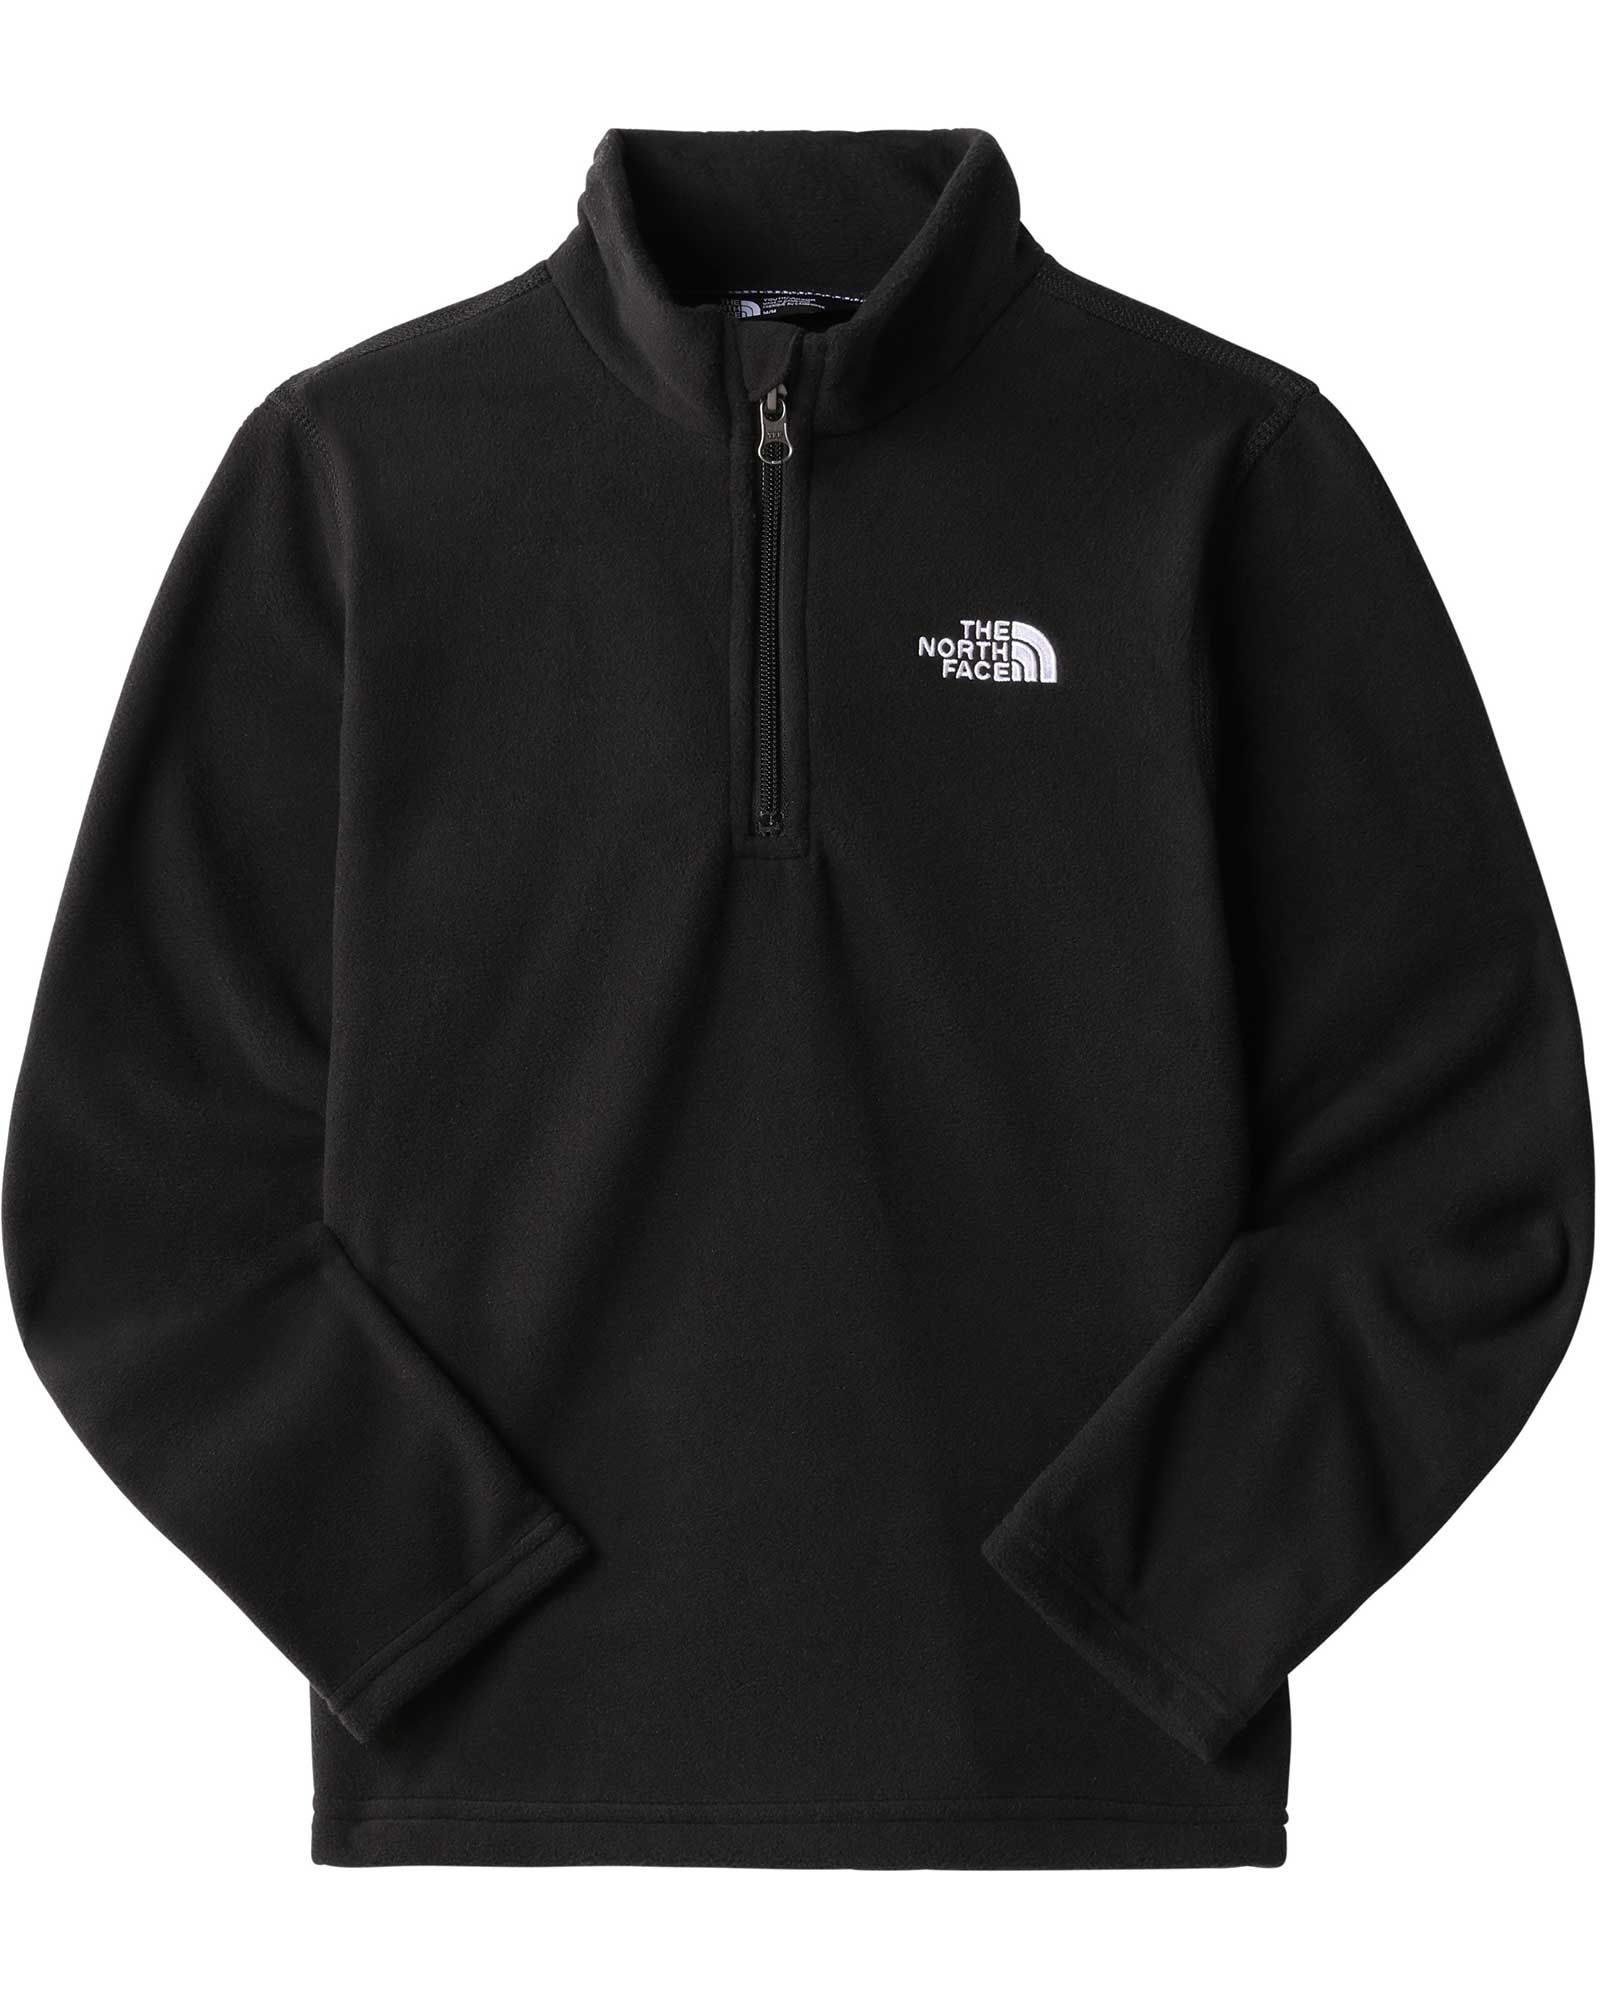 Product image of The North Face Glacier Kids' Zip Neck